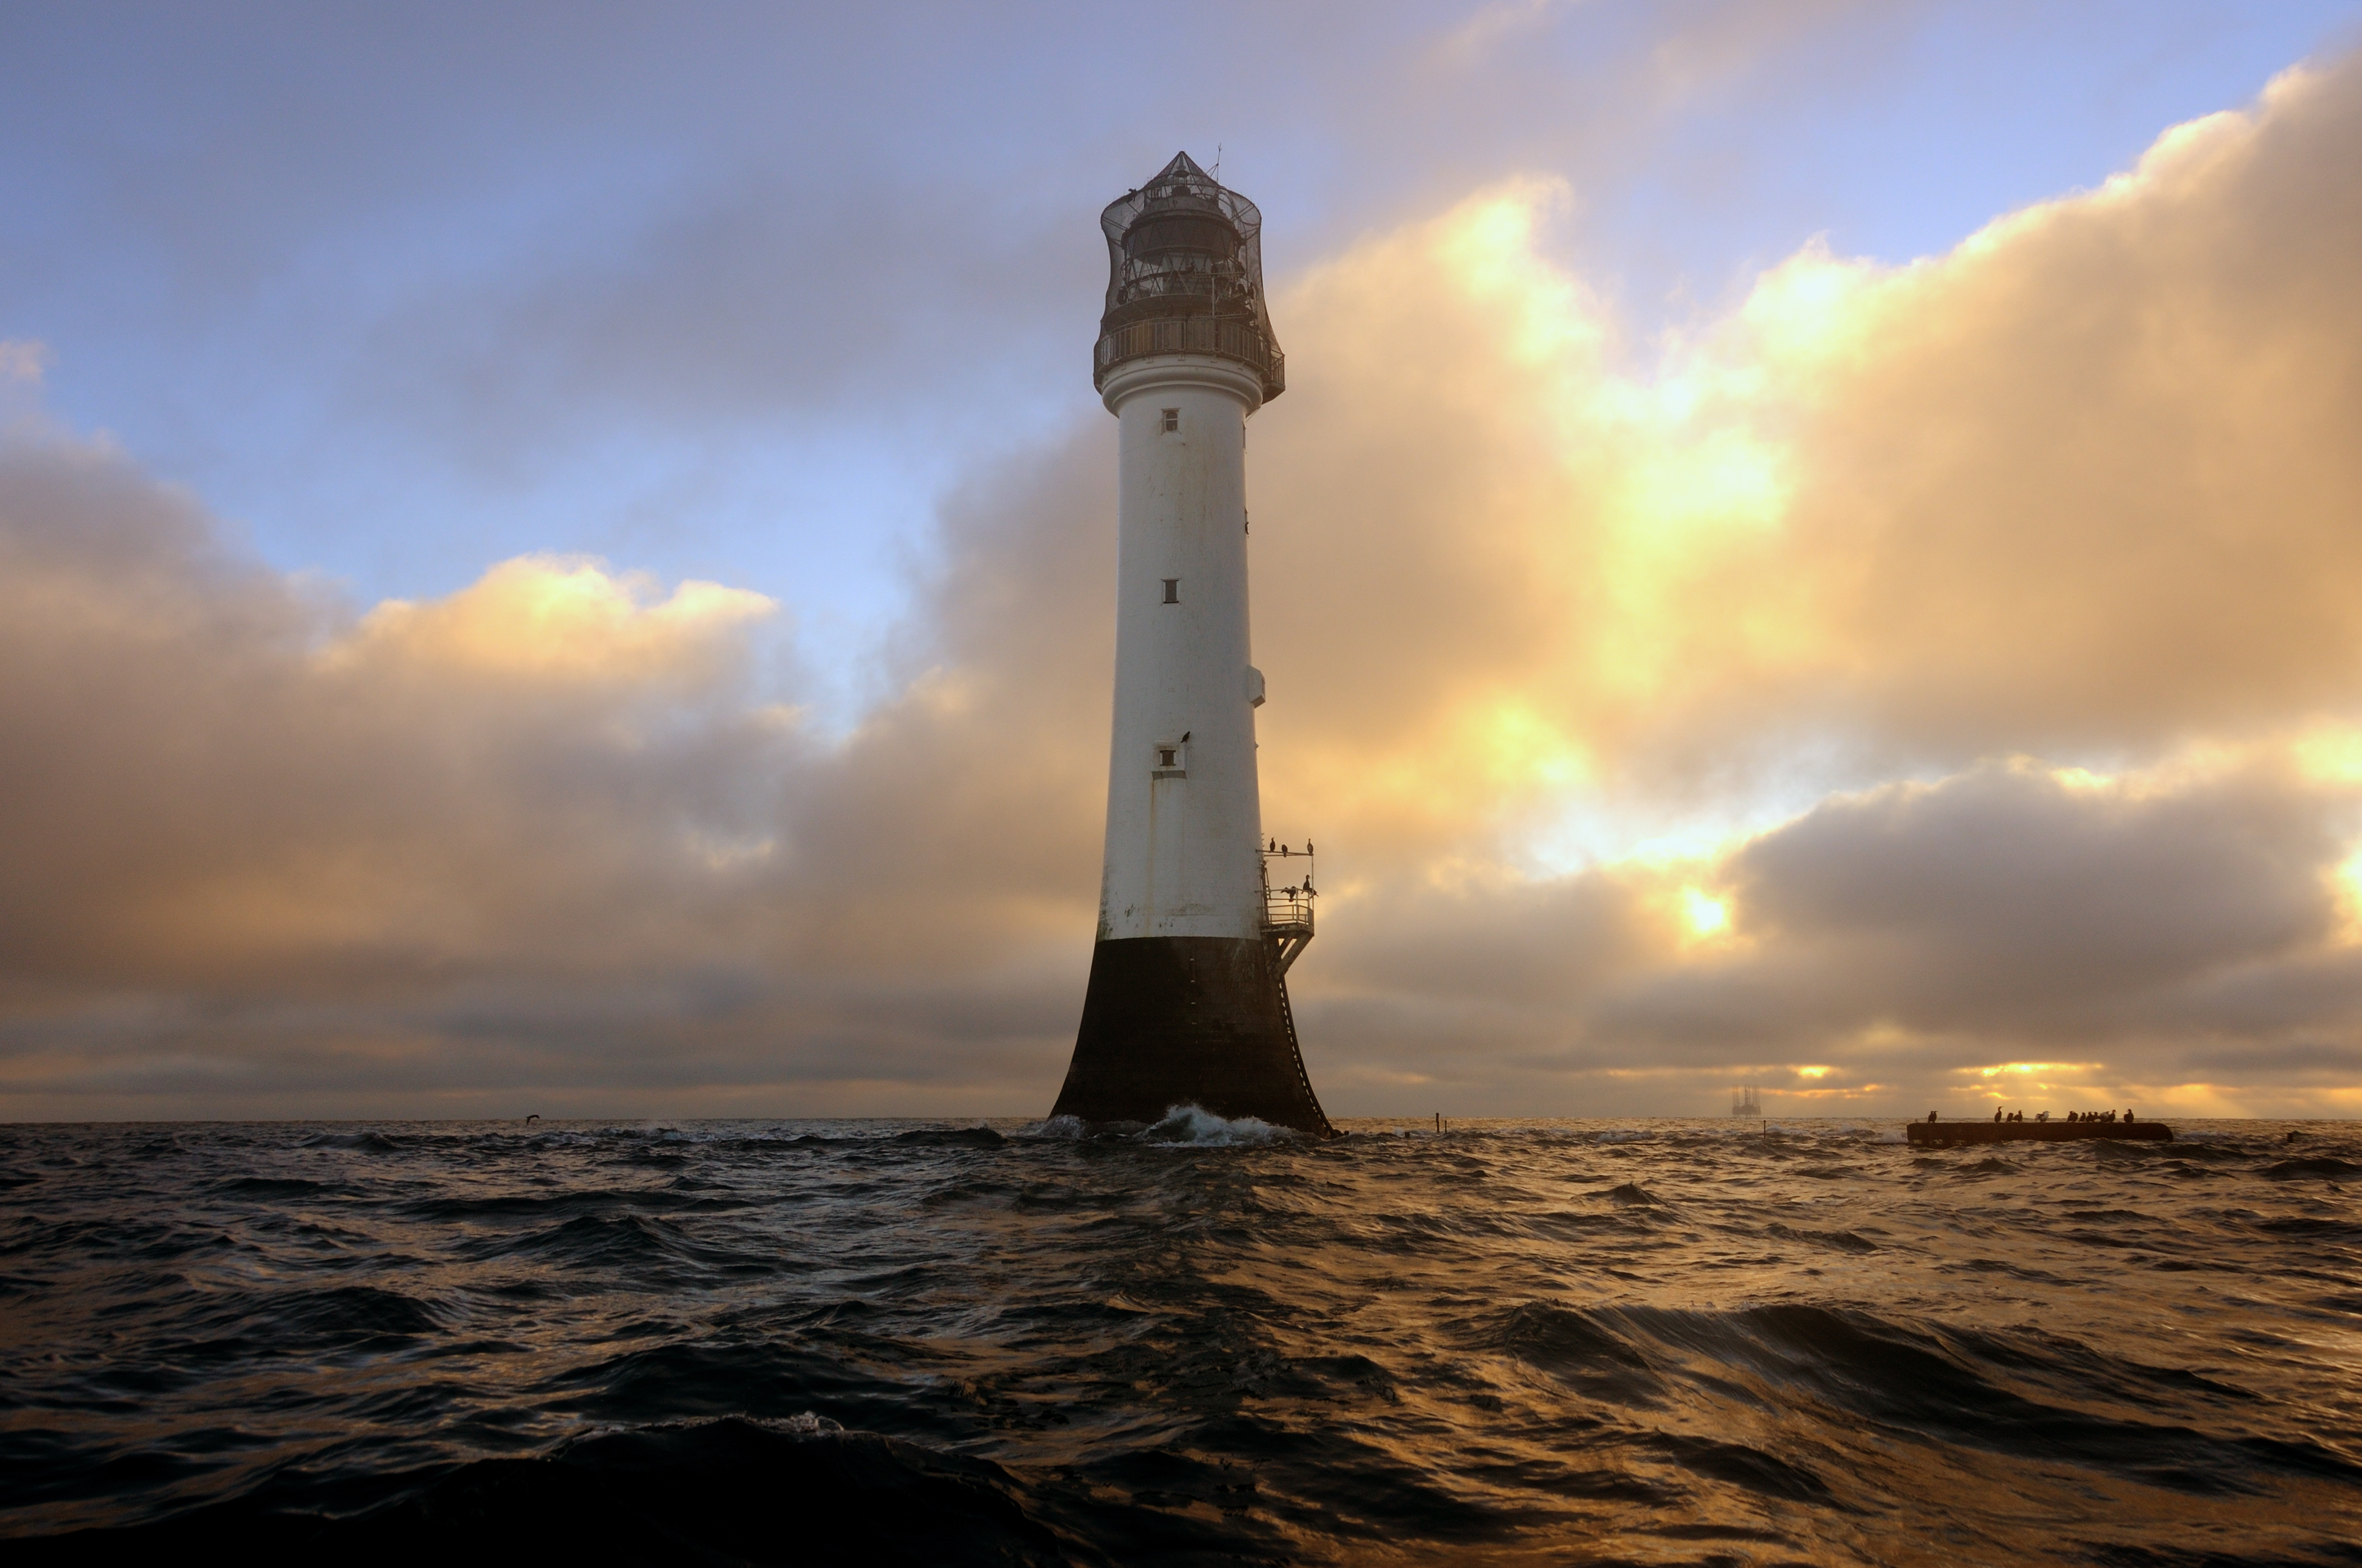 Photograph of the Bell Rock Lighthouse, courtesy of Ian Cowe